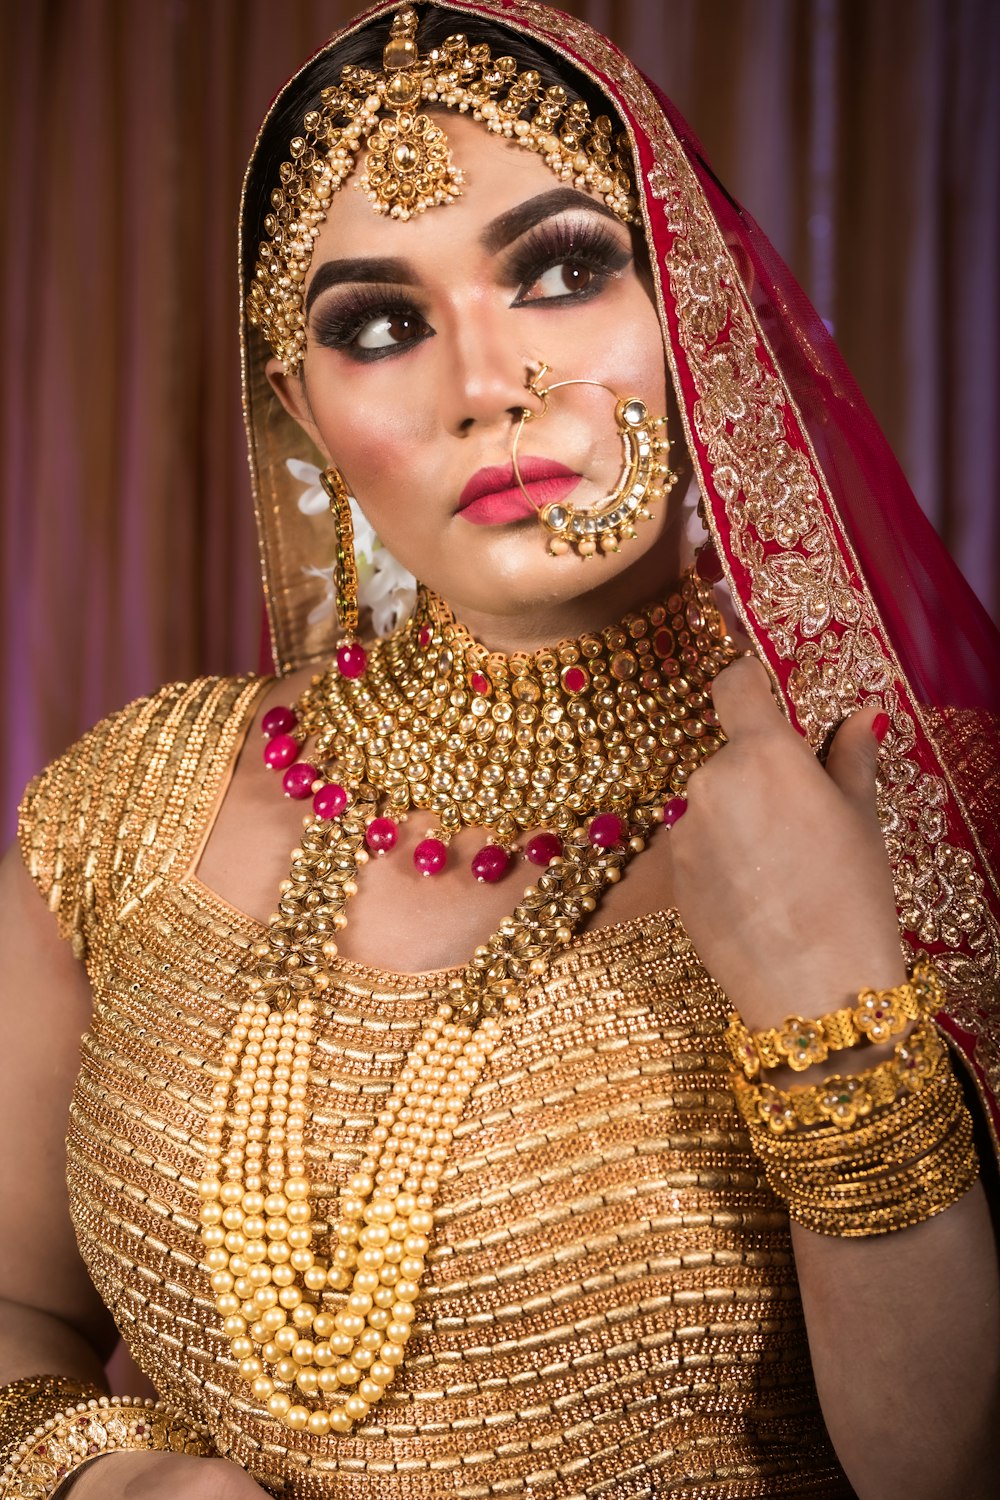 a woman wearing a gold and red bridal outfit